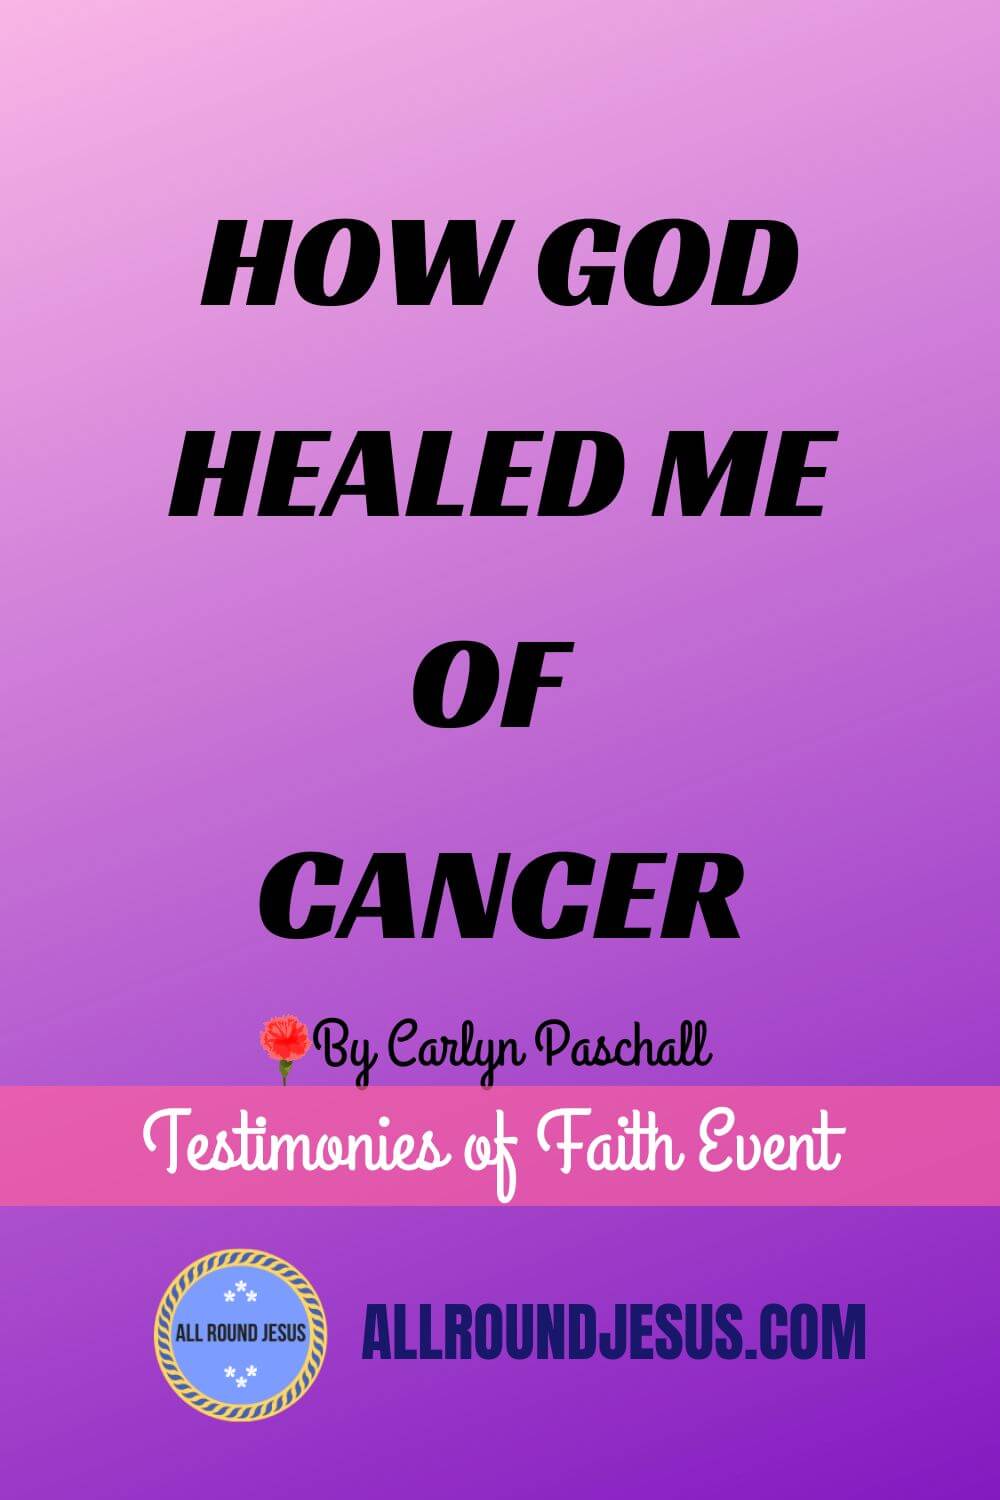 Testimony-of-faith-and-healing-from-Cancer